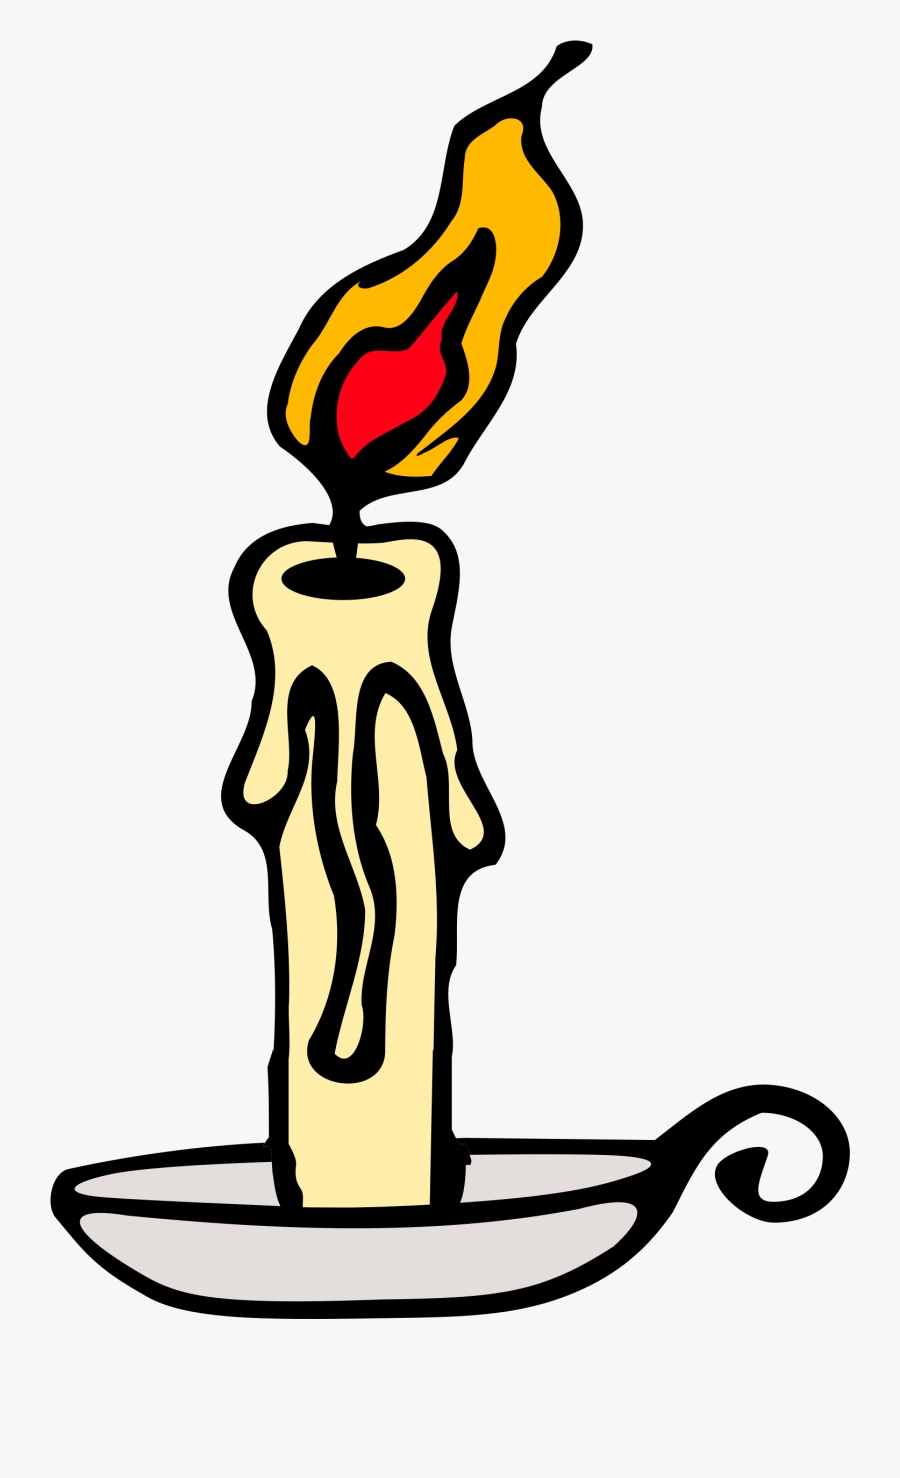 Melting Candle Clipart Candle Flame - Candle Clip Art, Transparent Clipart